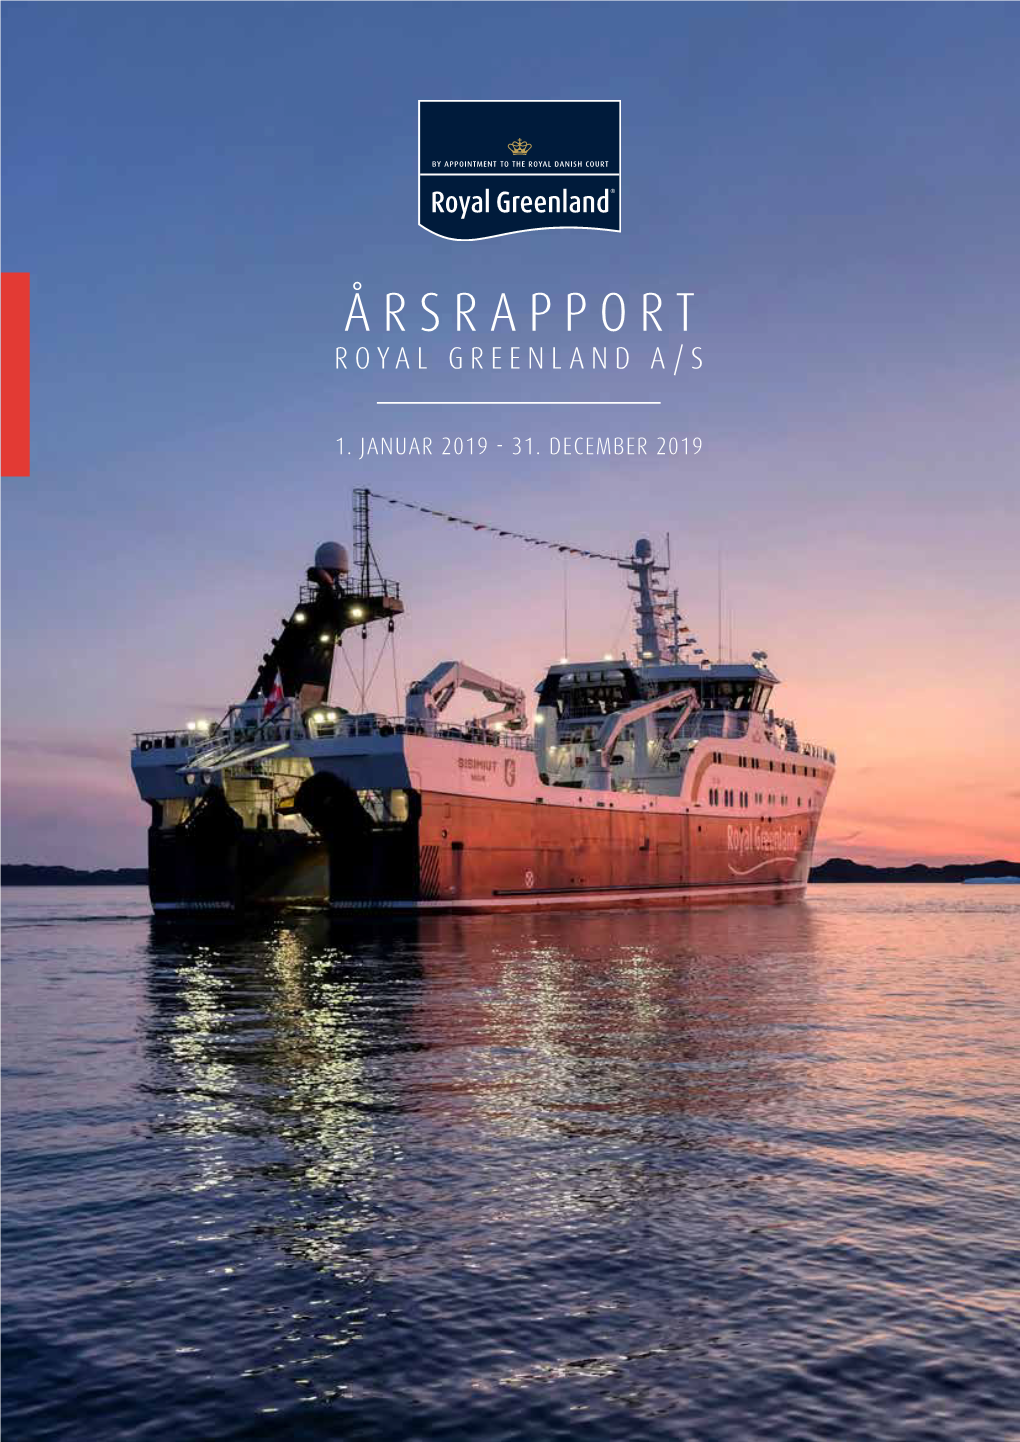 Årsrapport Royal Greenland A/S